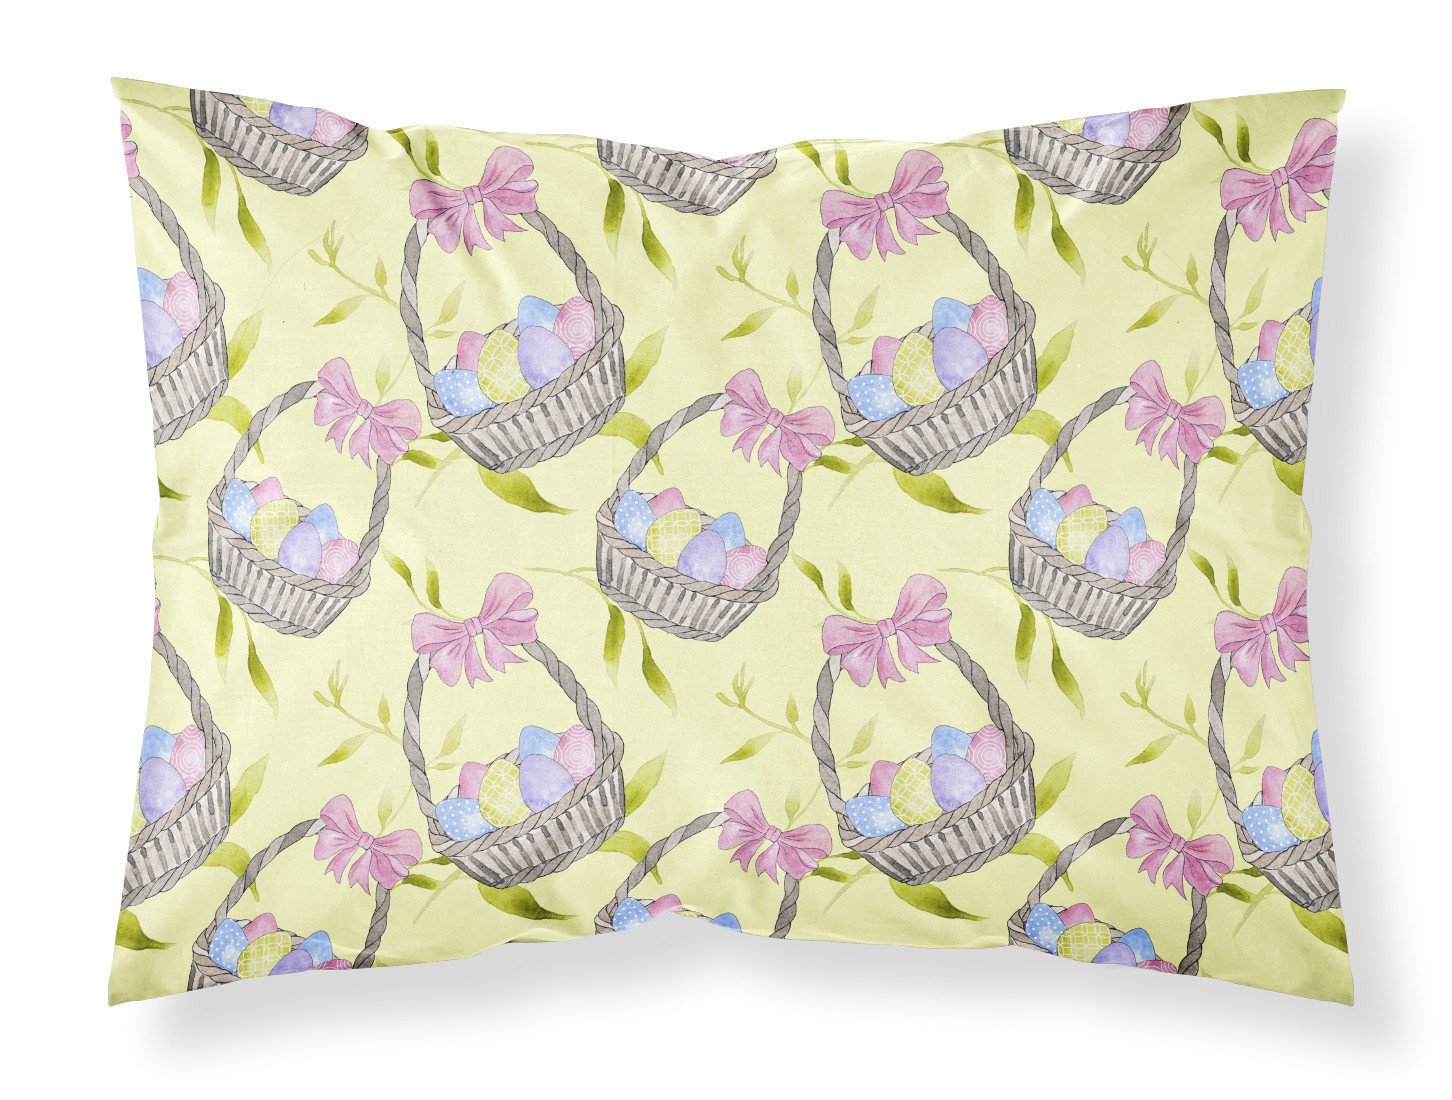 Easter Basket and Eggs Fabric Standard Pillowcase BB7490PILLOWCASE by Caroline's Treasures